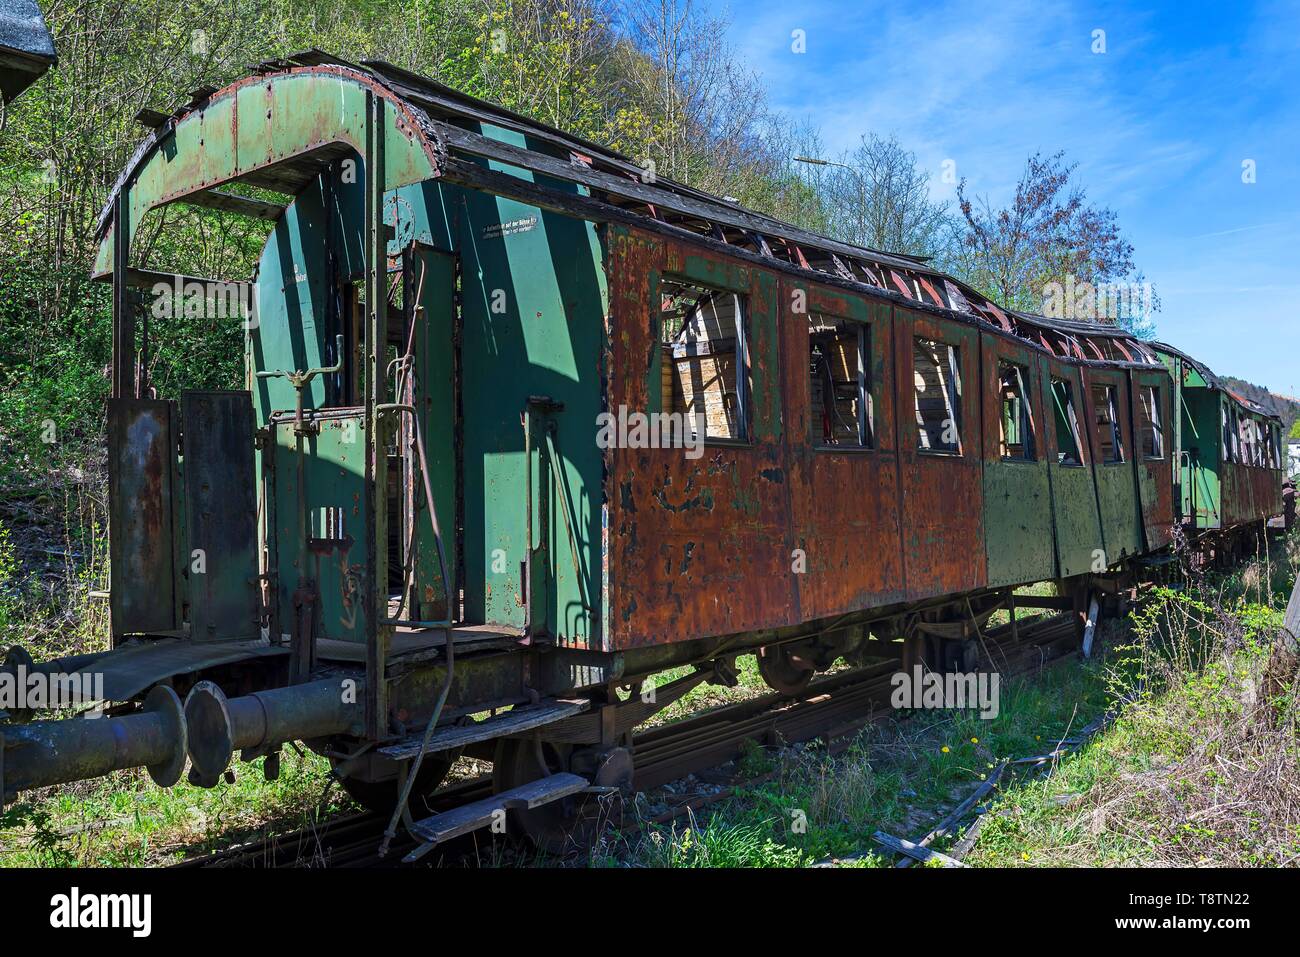 Discarded, dilapidated rusty wagon of a passenger train on a railroad siding, Upper Franconia, Bavaria, Germany Stock Photo